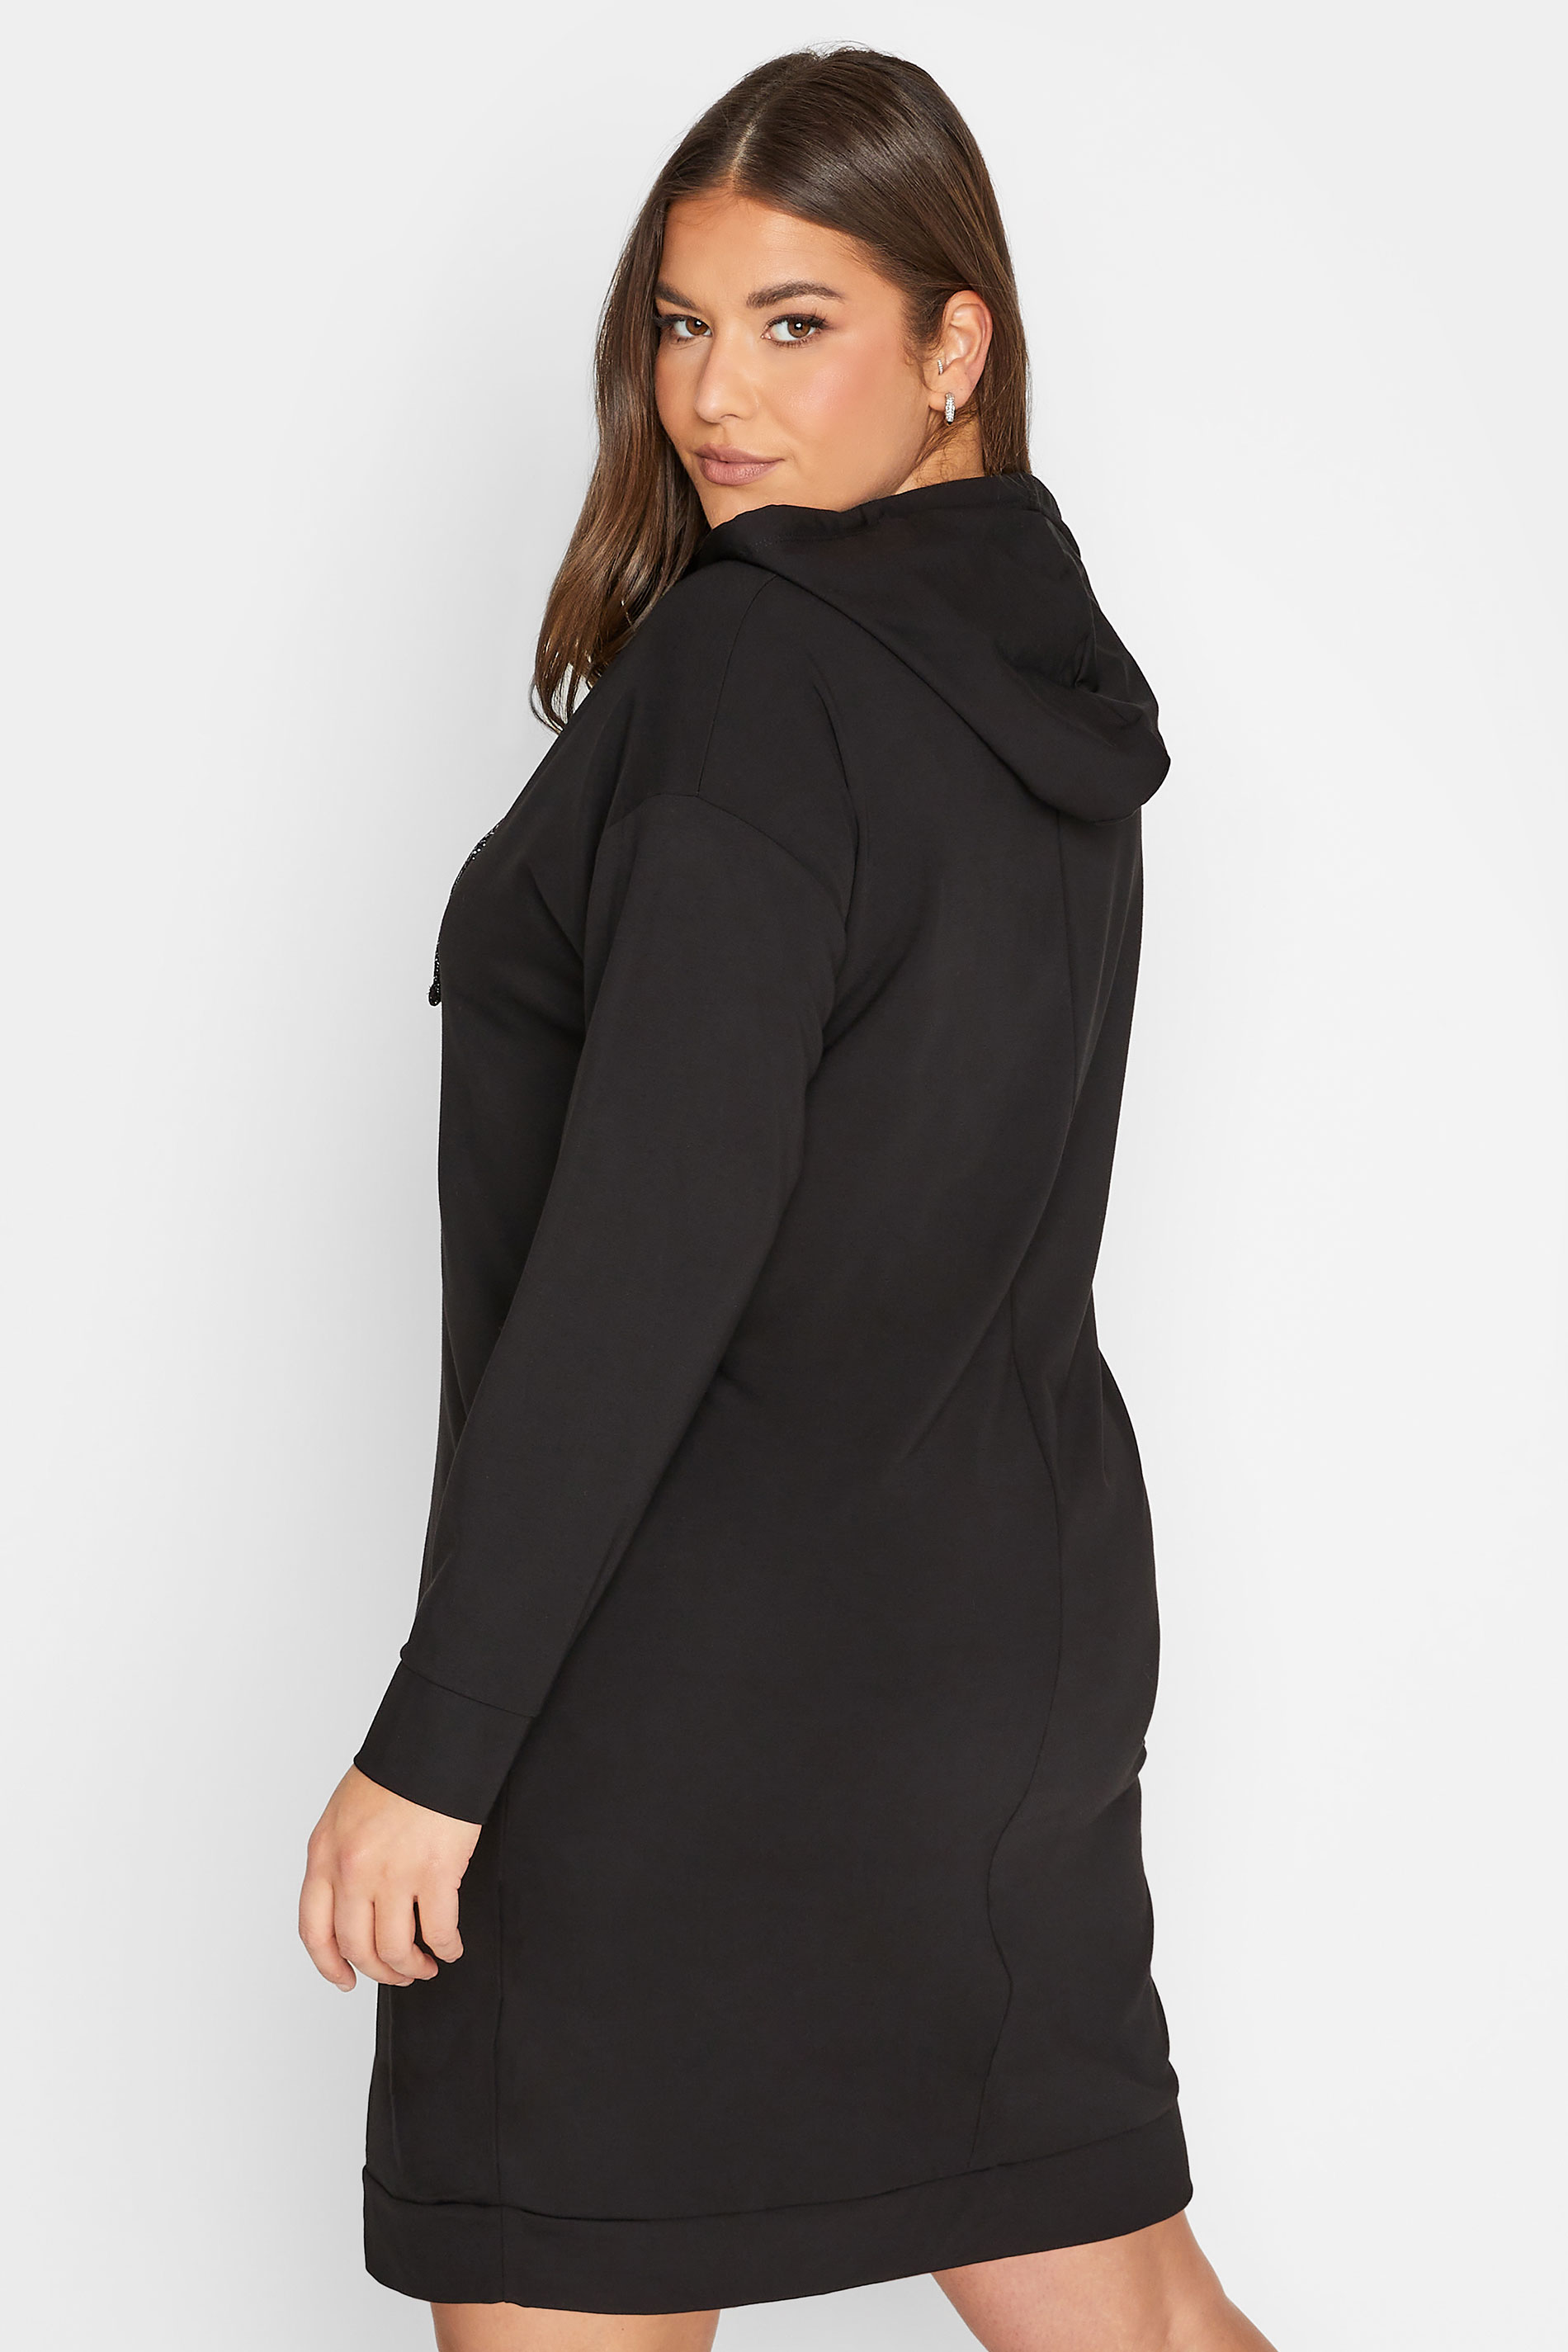 YOURS Plus Size Curve Black Pocket Hoodie Dress | Yours Clothing  3